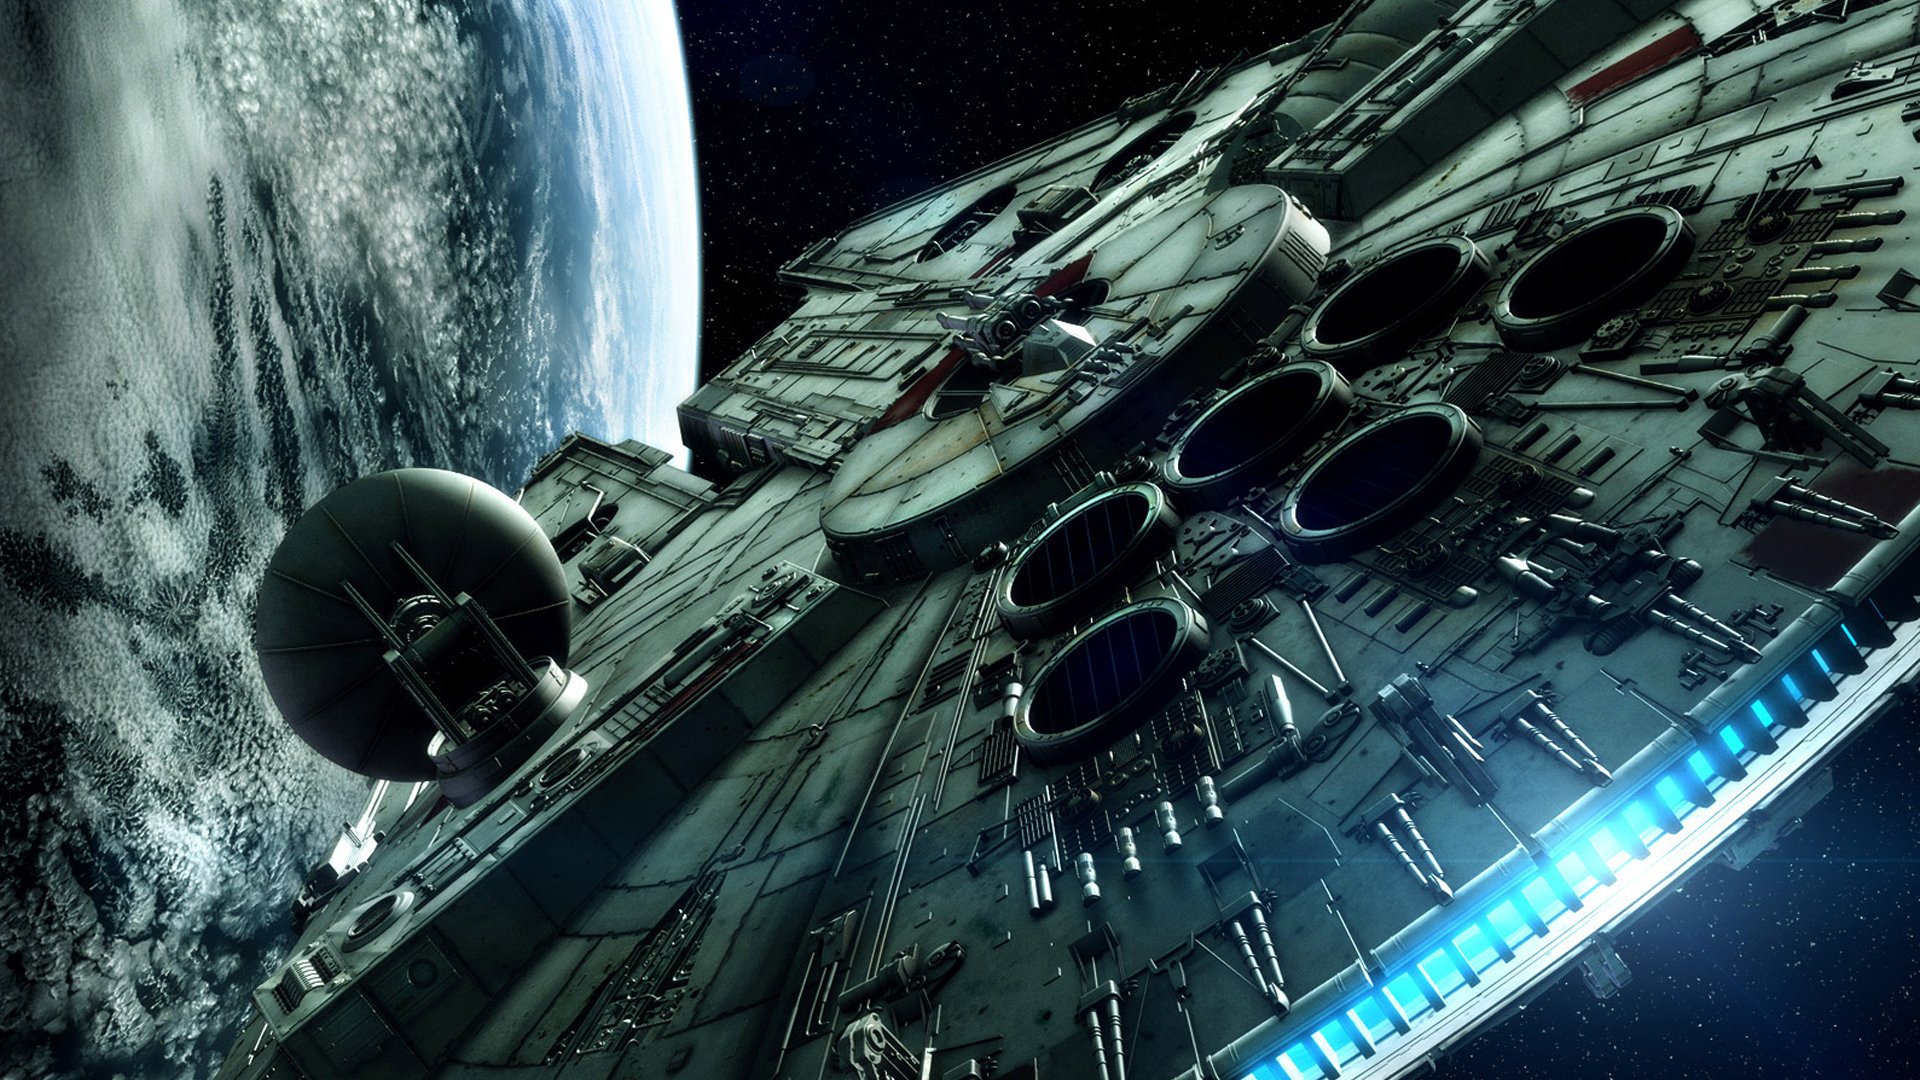  star war movie free download fbulous hd widescreen wallpapers of star